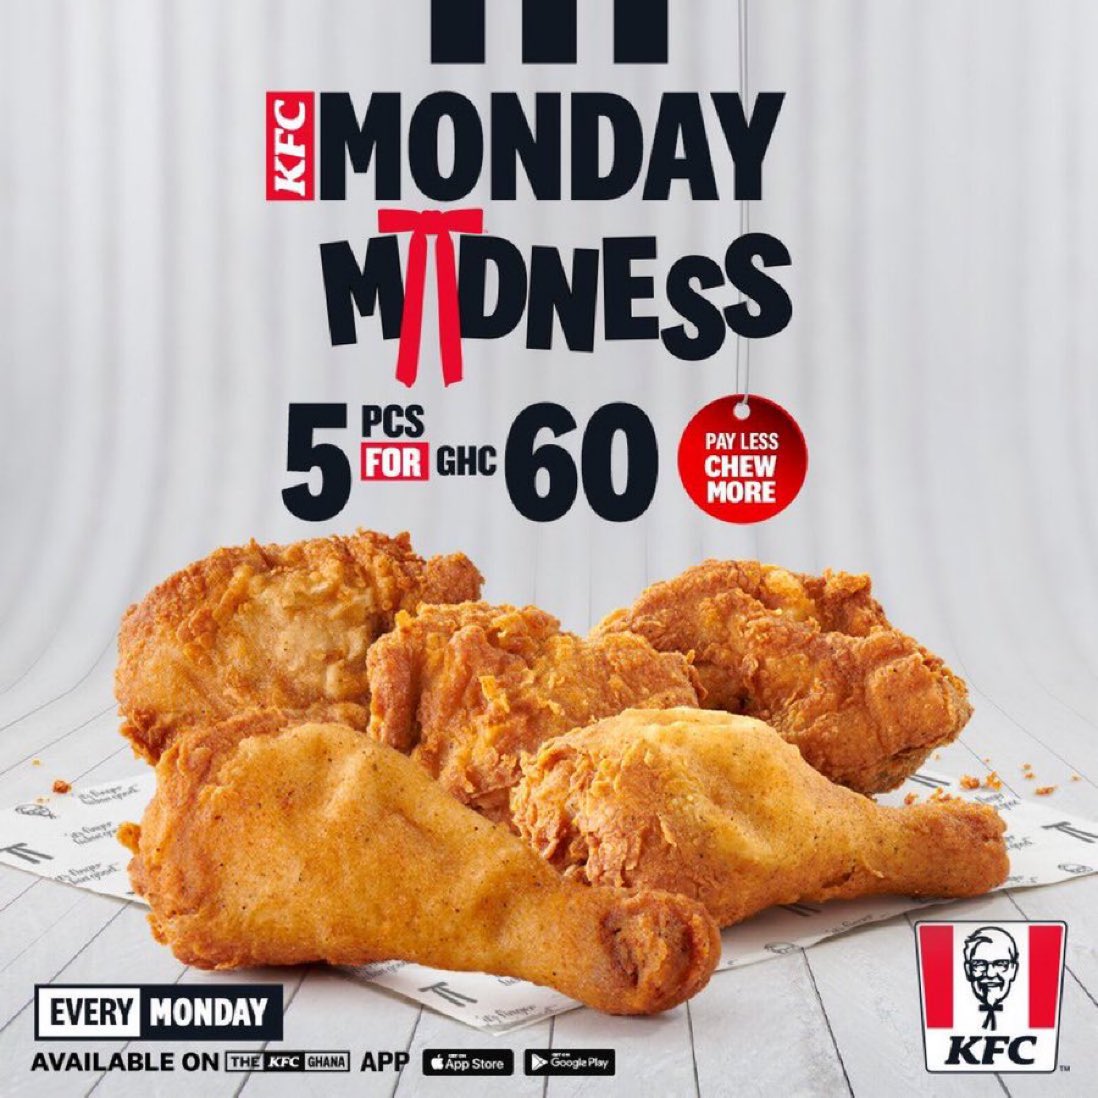 Walk into any KFC branch on every Monday at exactly 10am and get yourself 5 fat pieces of chicken with just 60 cedis. It’s the #KFCMondayMadness promo. Don’t miss out.